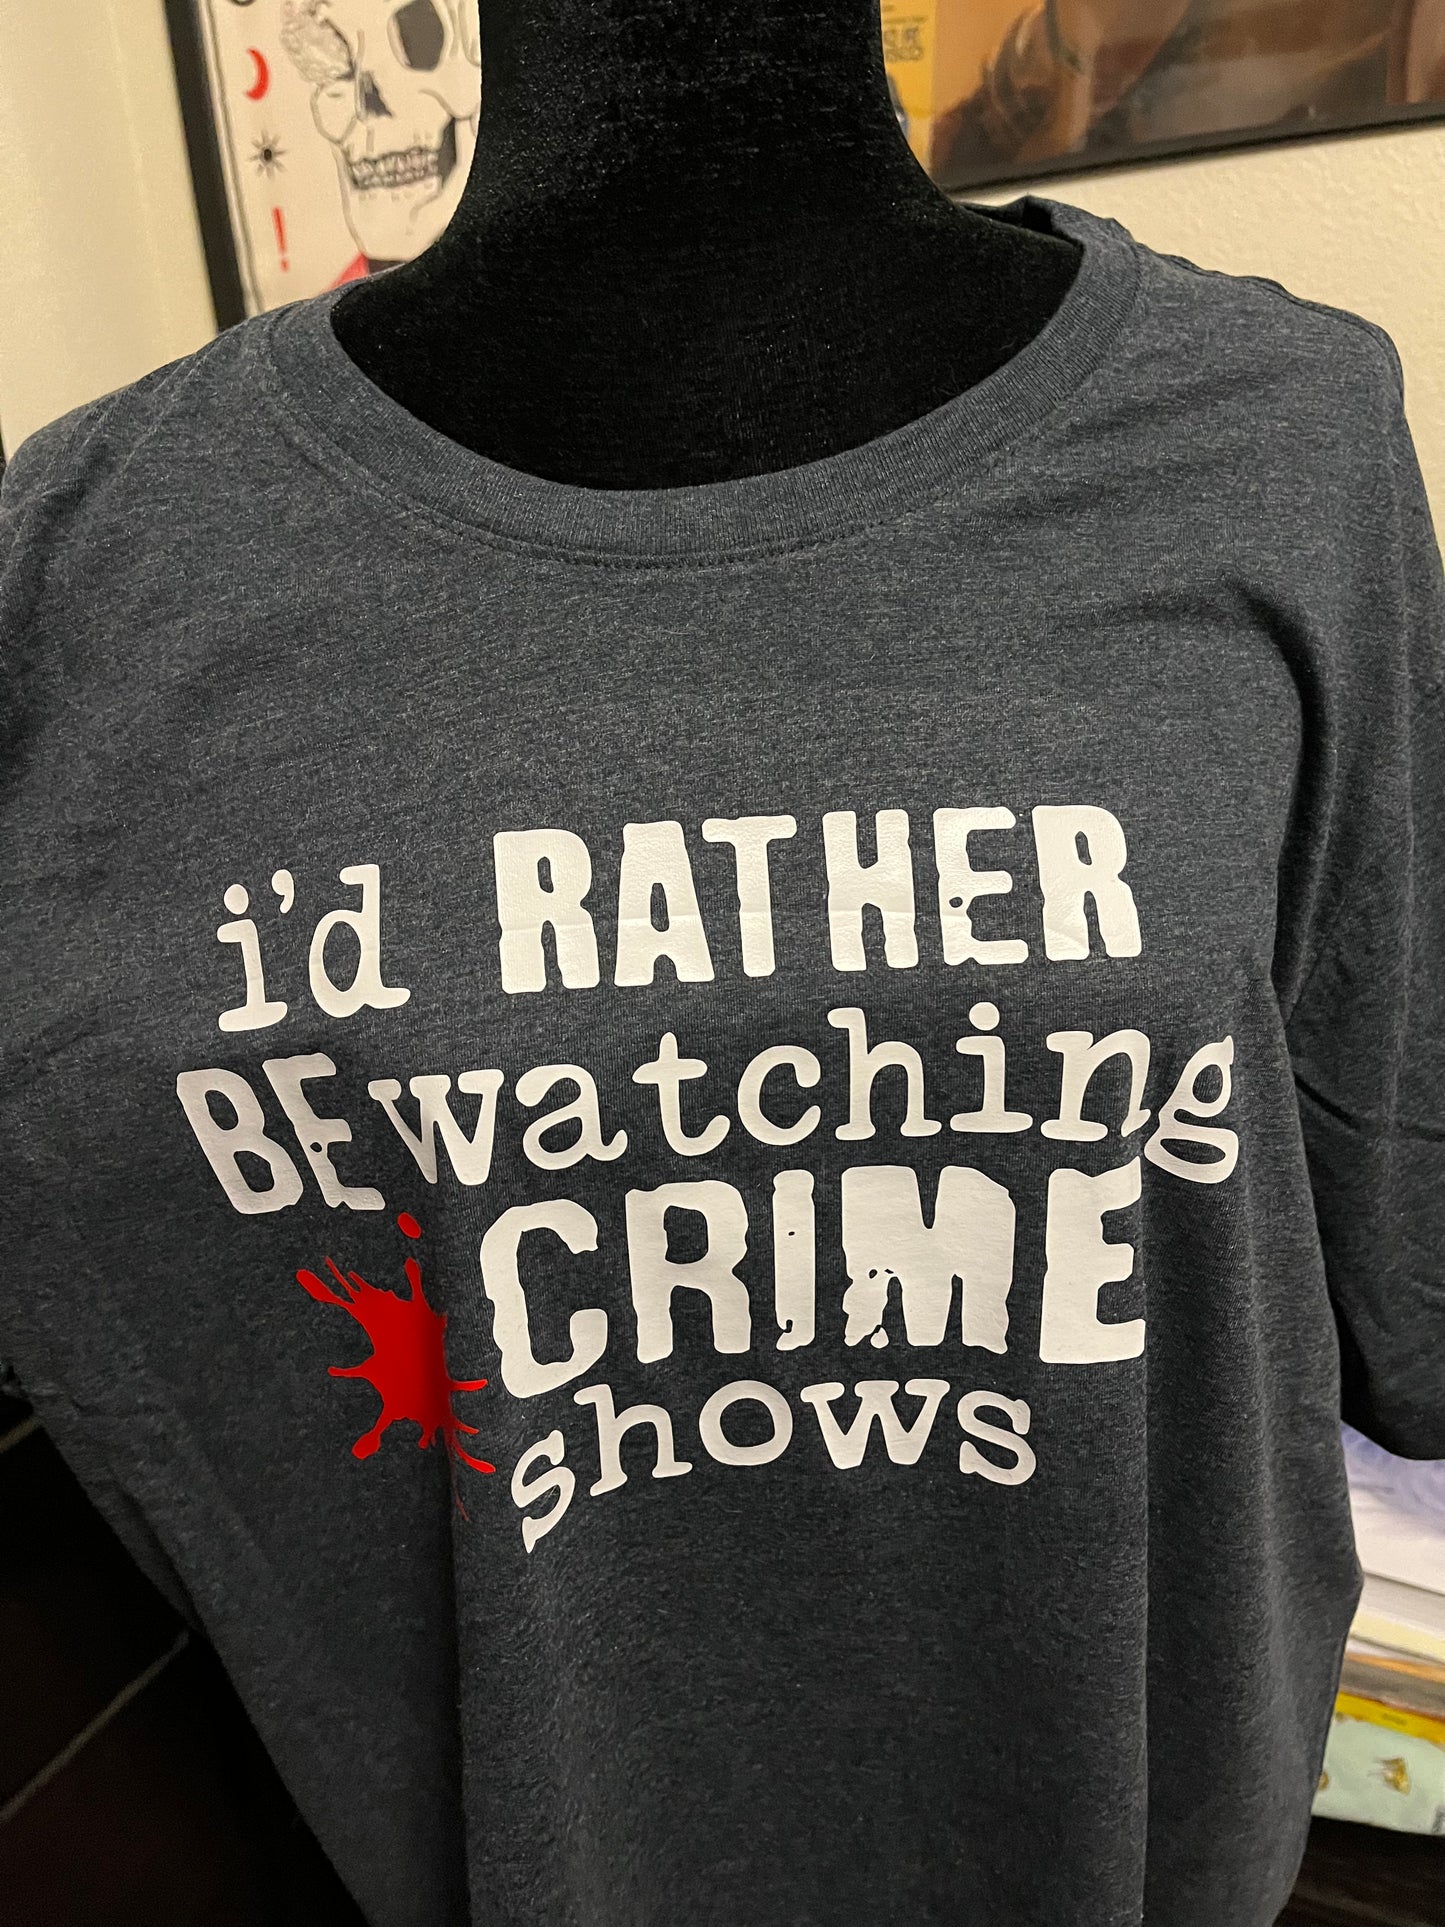 I'd Rather Be Watching Crime Shows